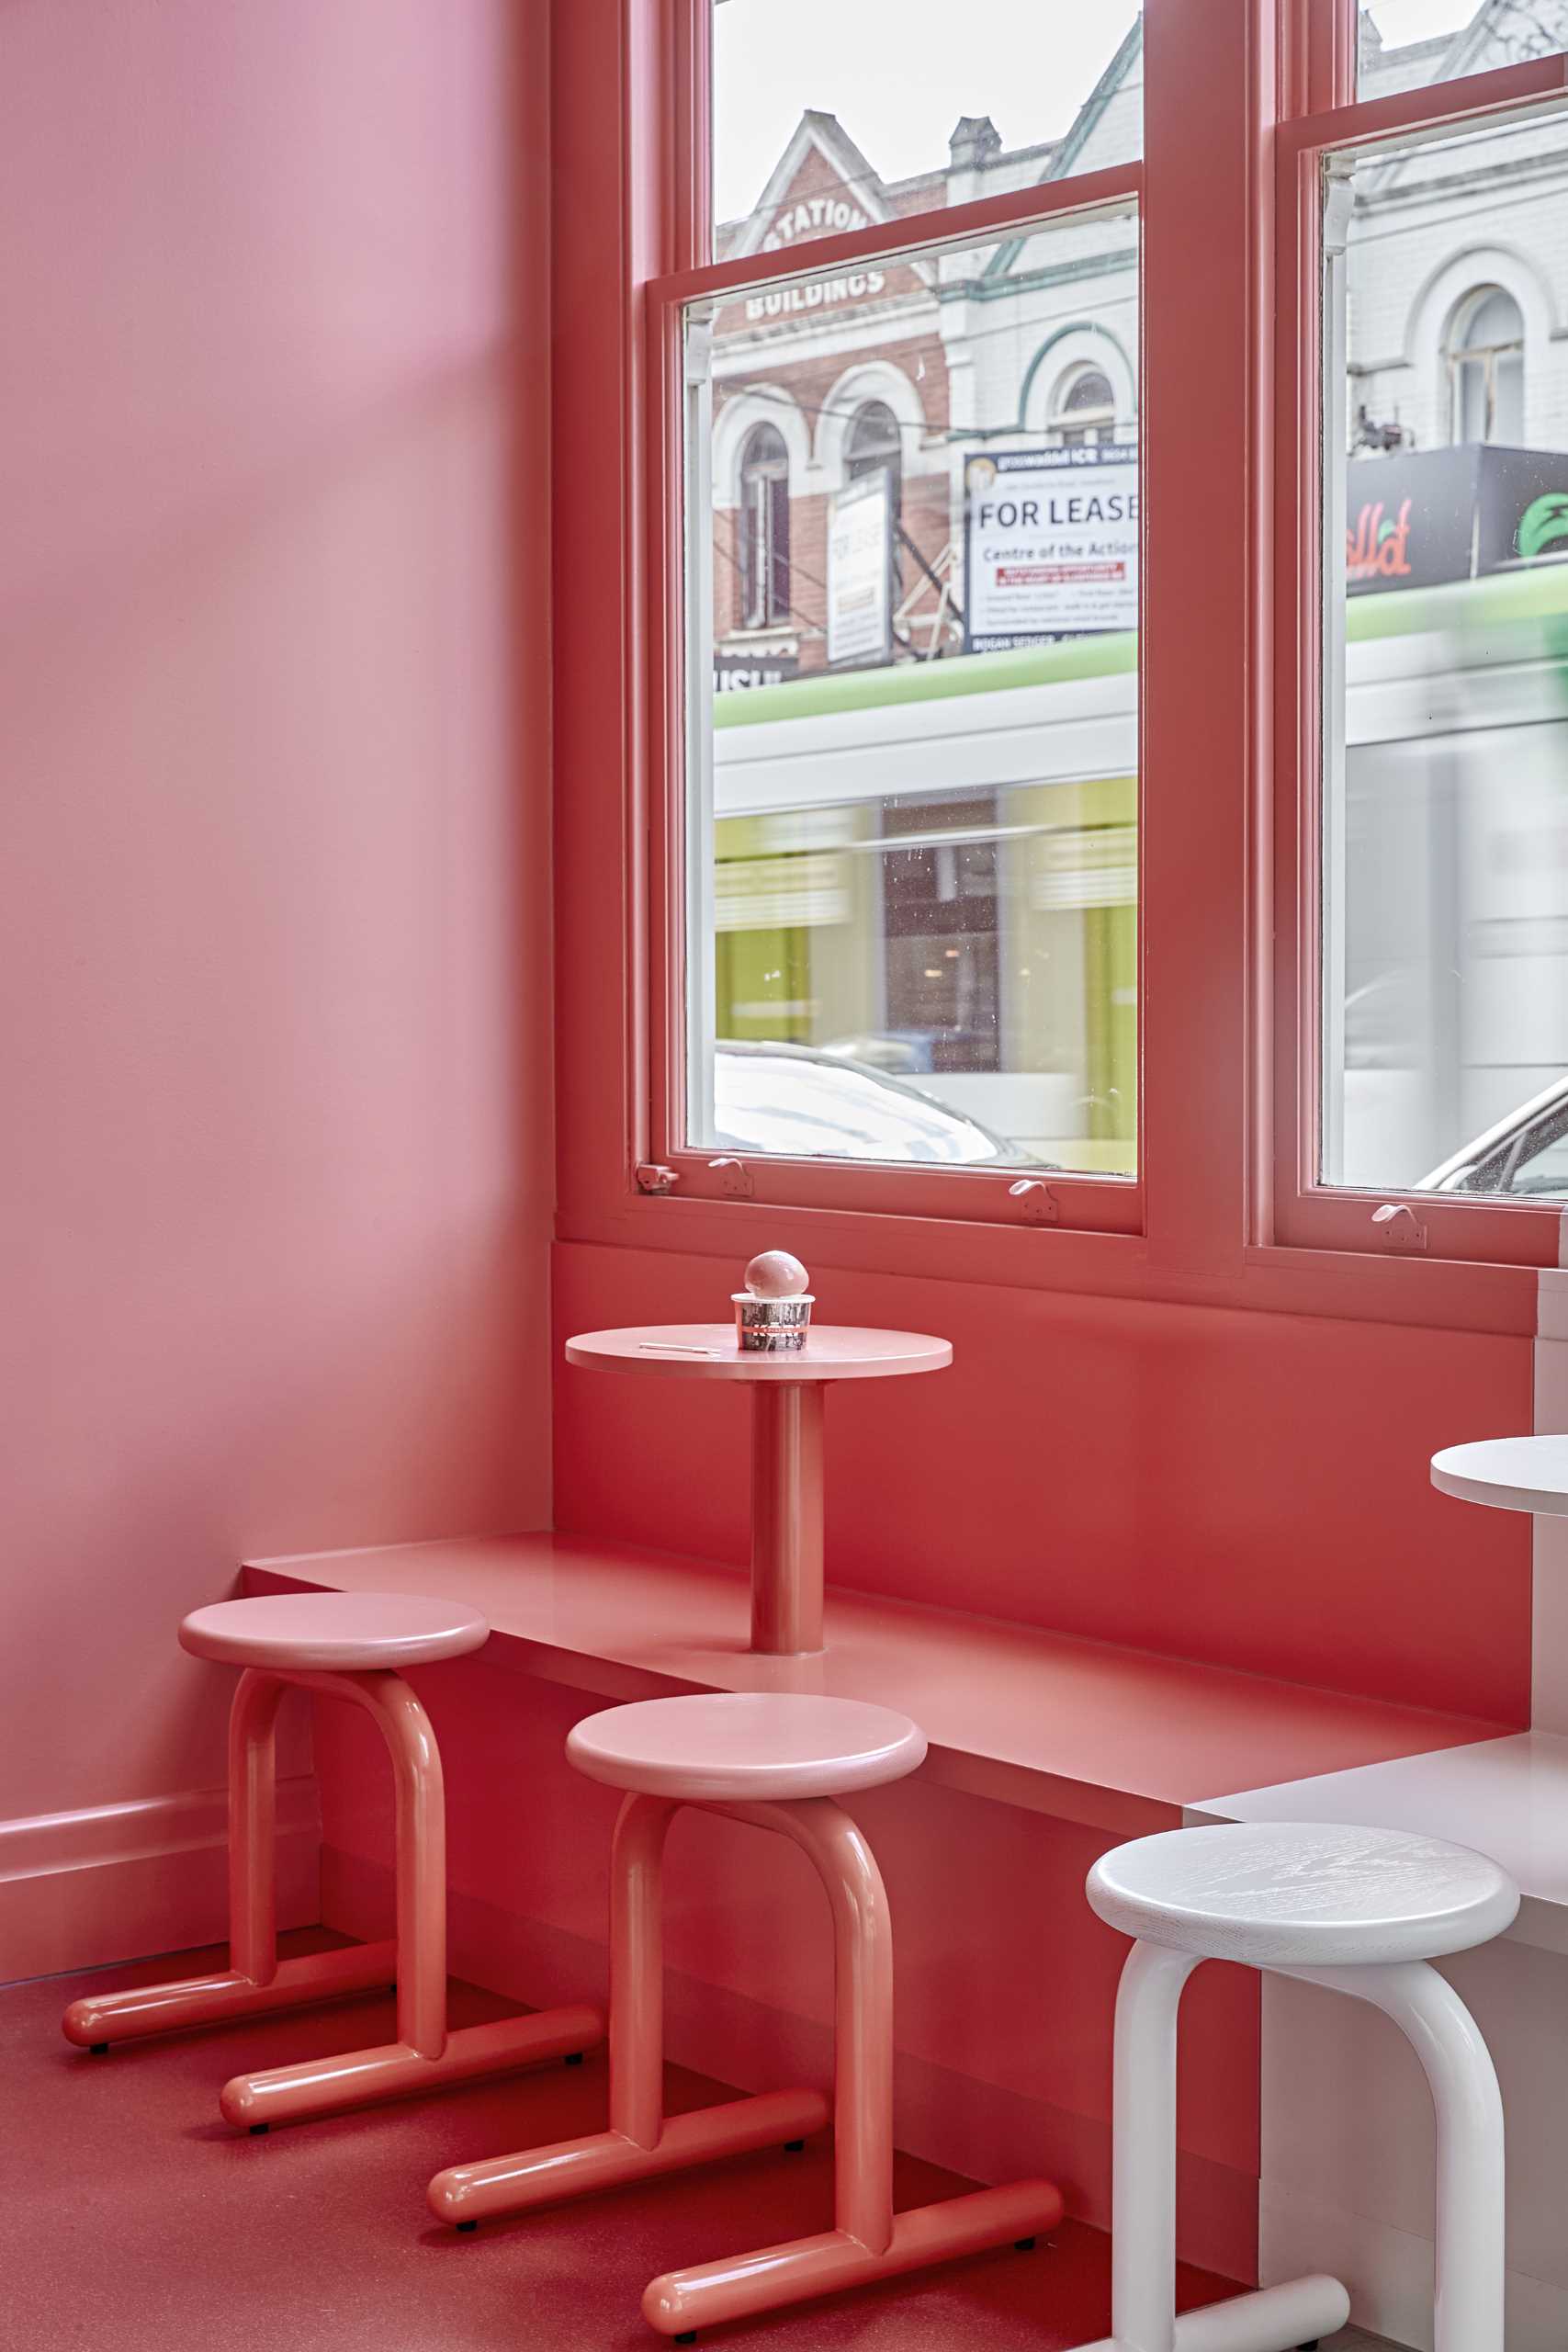 A modern ice cream shop with a matte pink and white interior, and seats by the window.